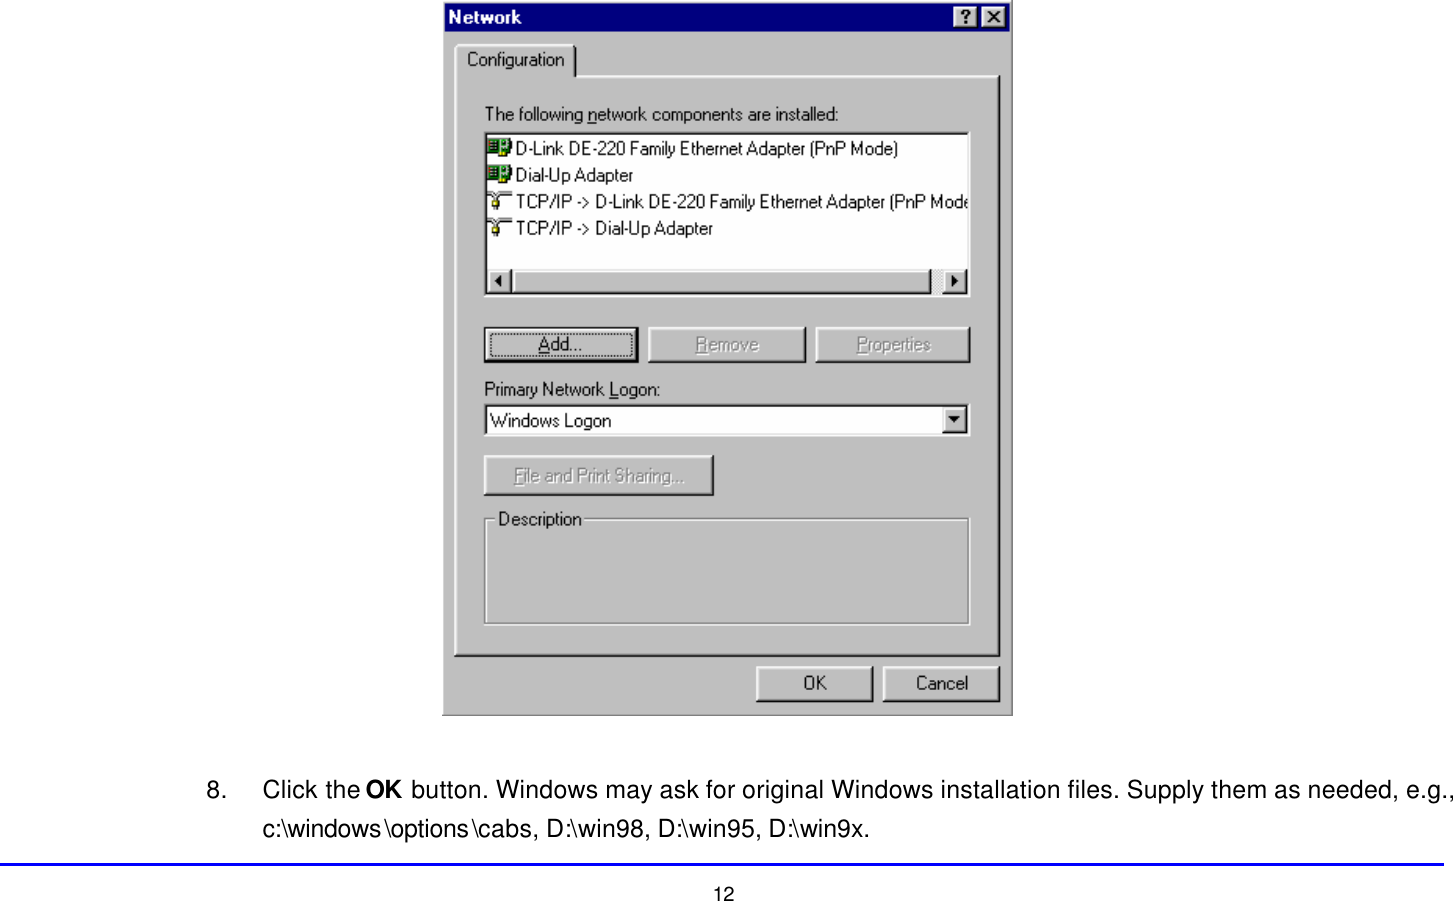  12   8. Click the OK button. Windows may ask for original Windows installation files. Supply them as needed, e.g., c:\windows\options\cabs, D:\win98, D:\win95, D:\win9x. 